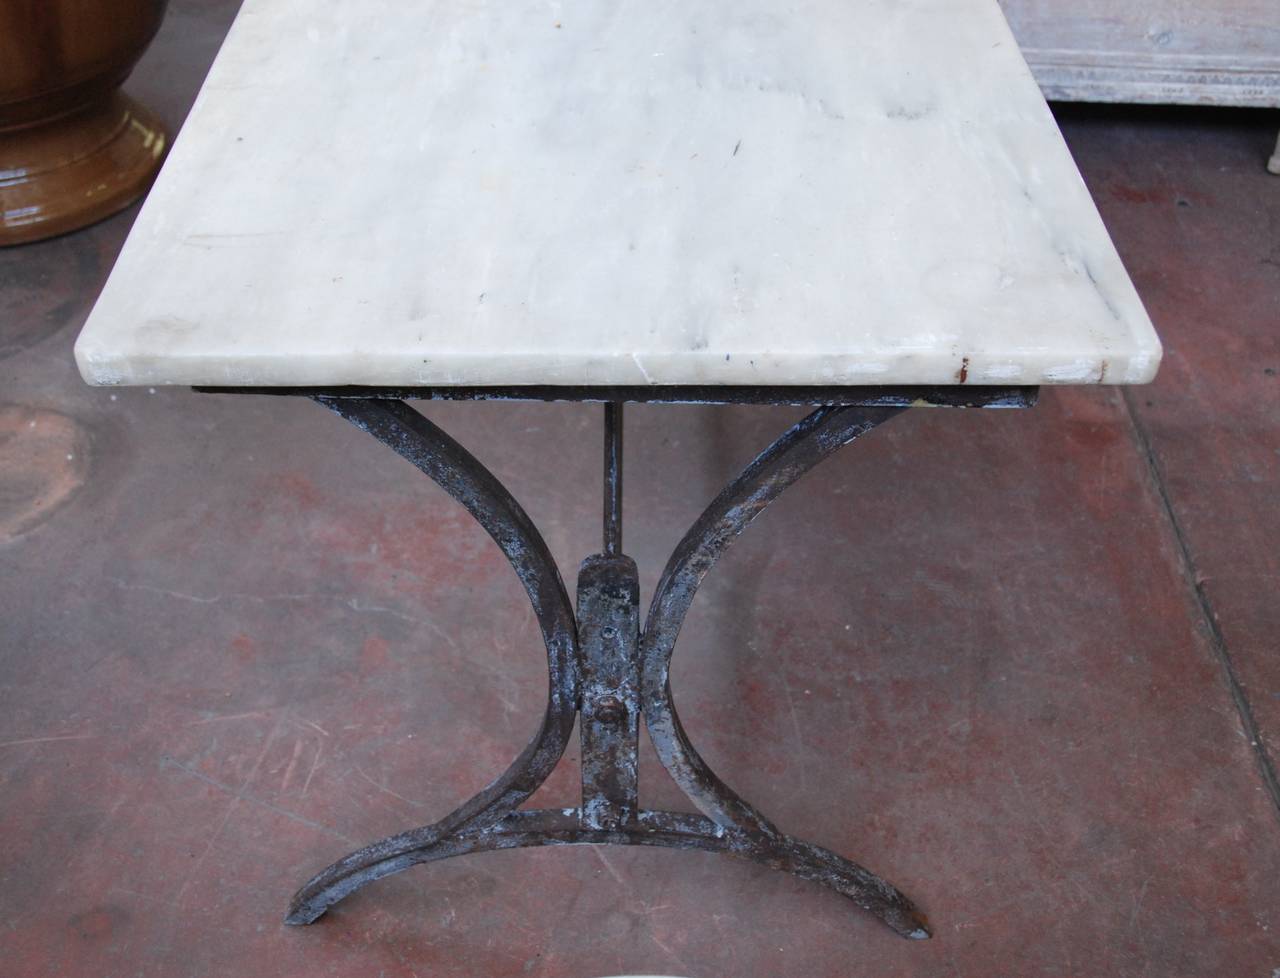 19th century iron marble-top table from Italy. Great aged patina on the iron. Original marble top. 